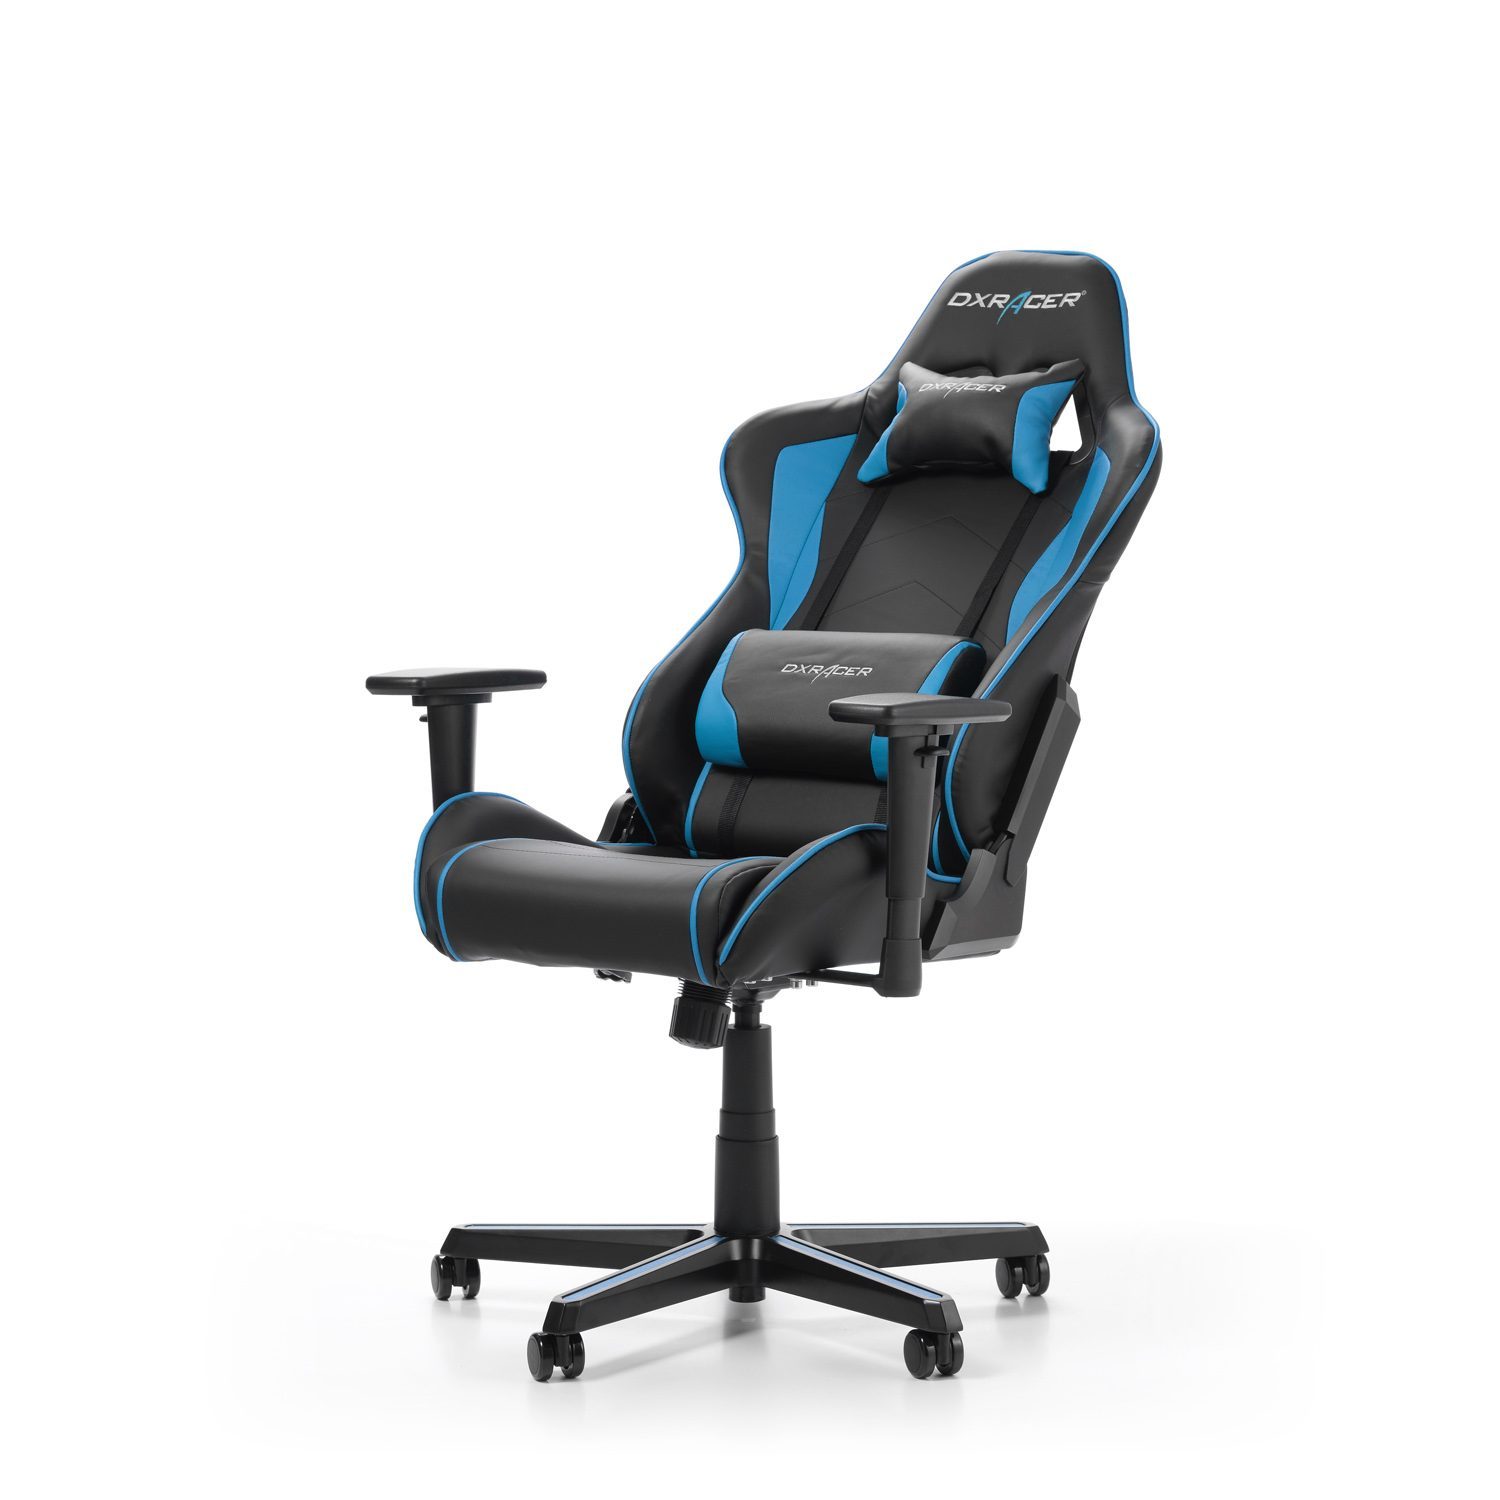  DXRACER  OD13 Formula  Series Gaming Chair Epic Computers